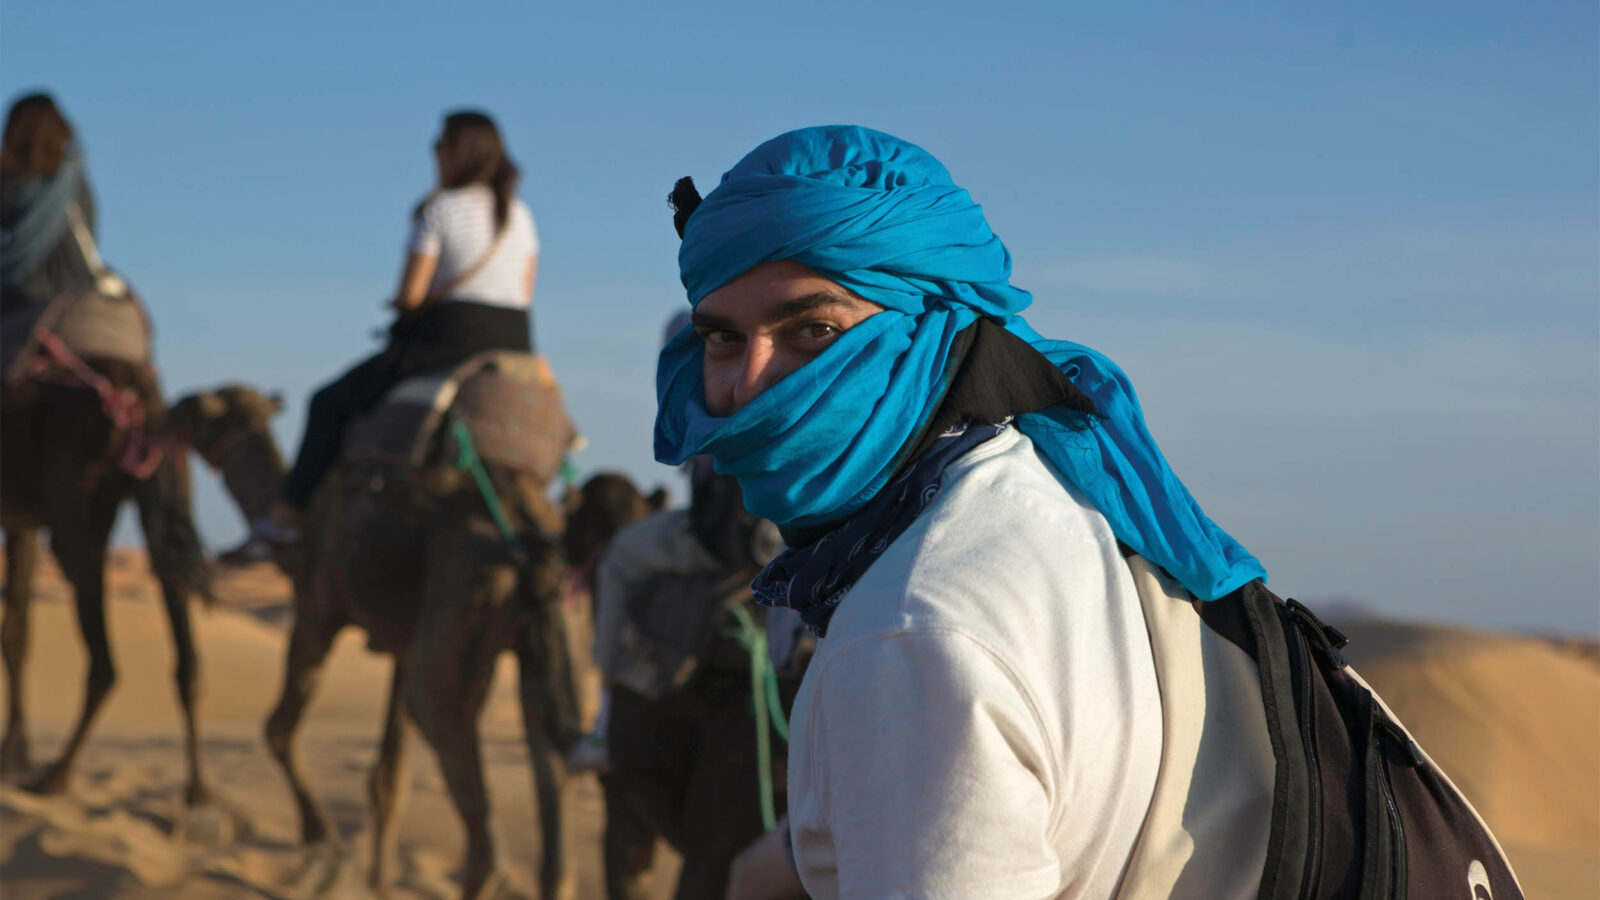 an abroad student in morocco, wearing a head covering while walking with camels in the desert